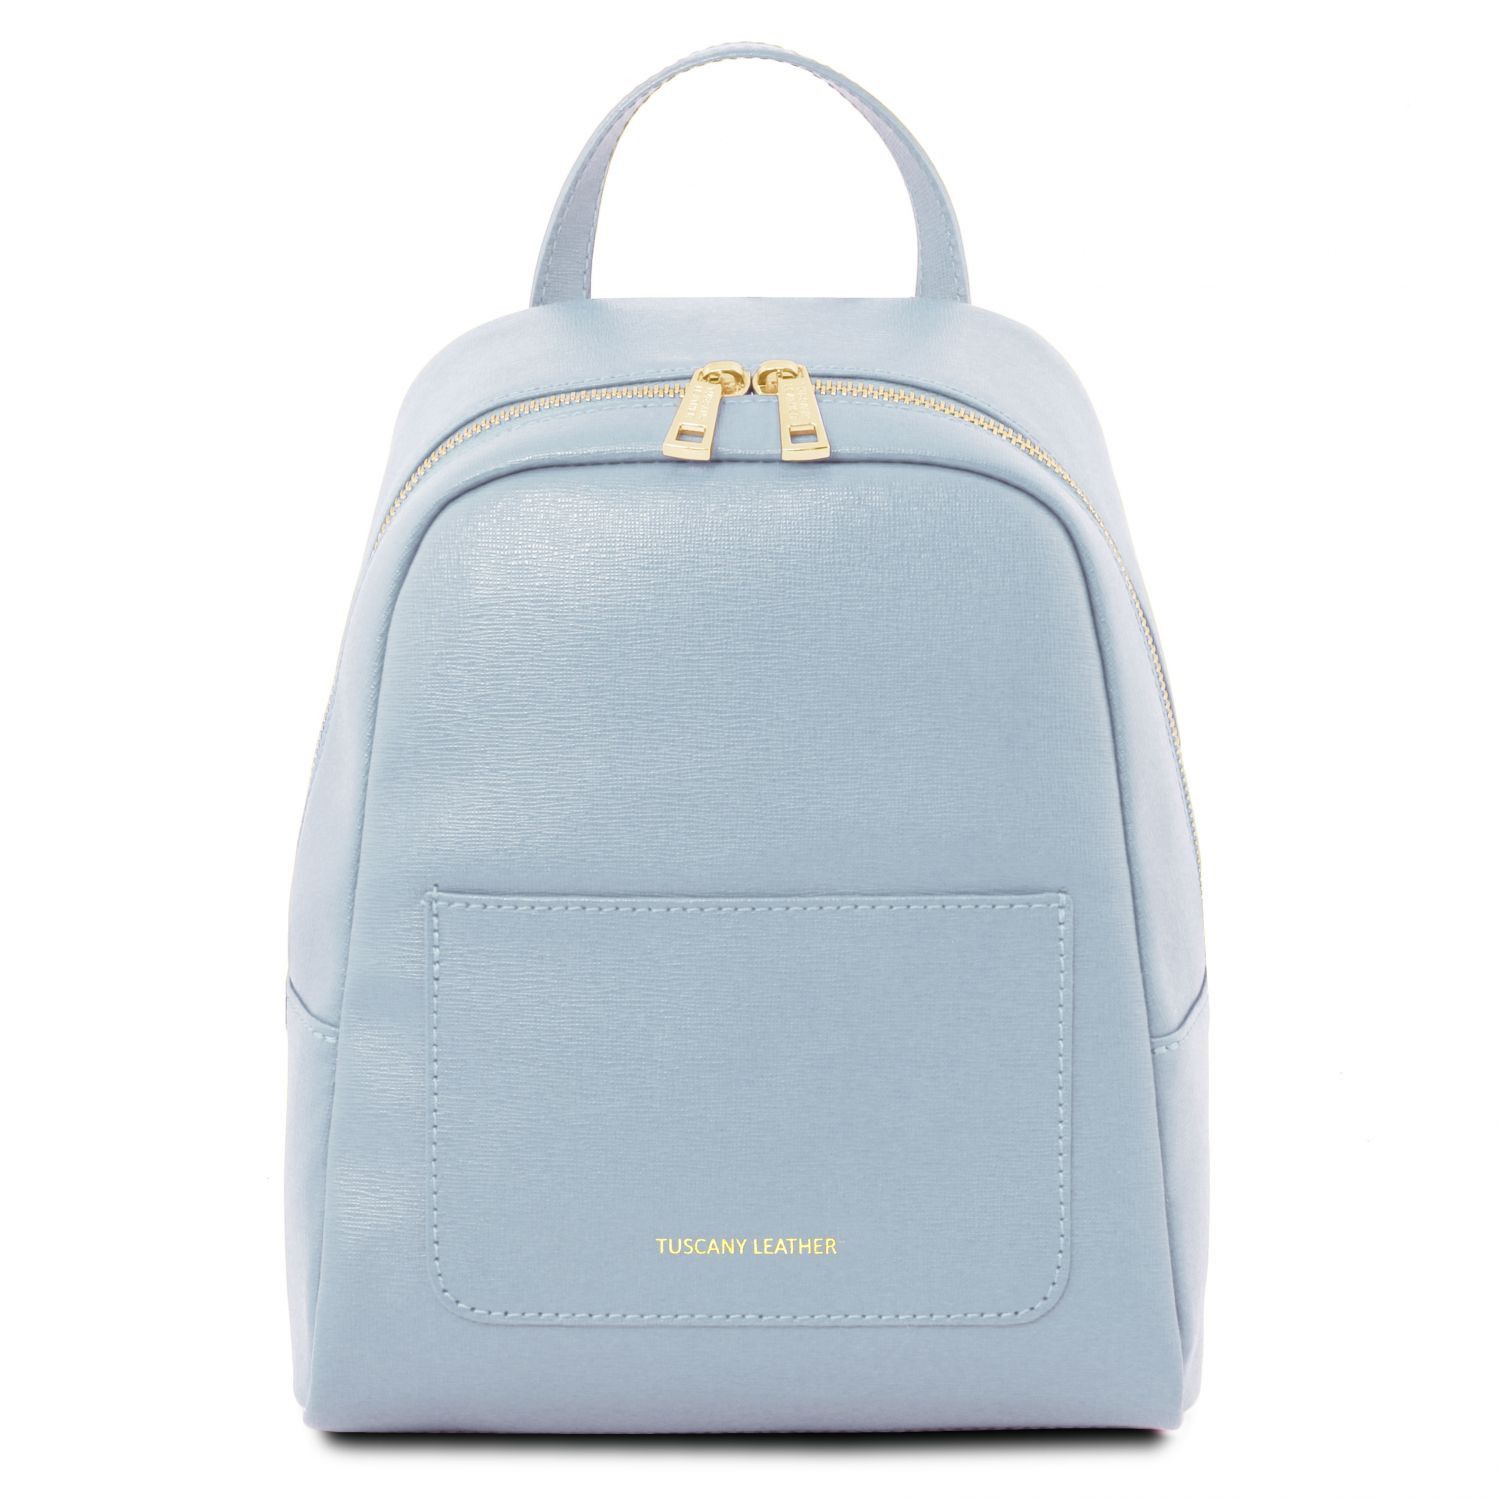 TL Bag Small Saffiano Leather Backpack for Women Light Blue TL141701